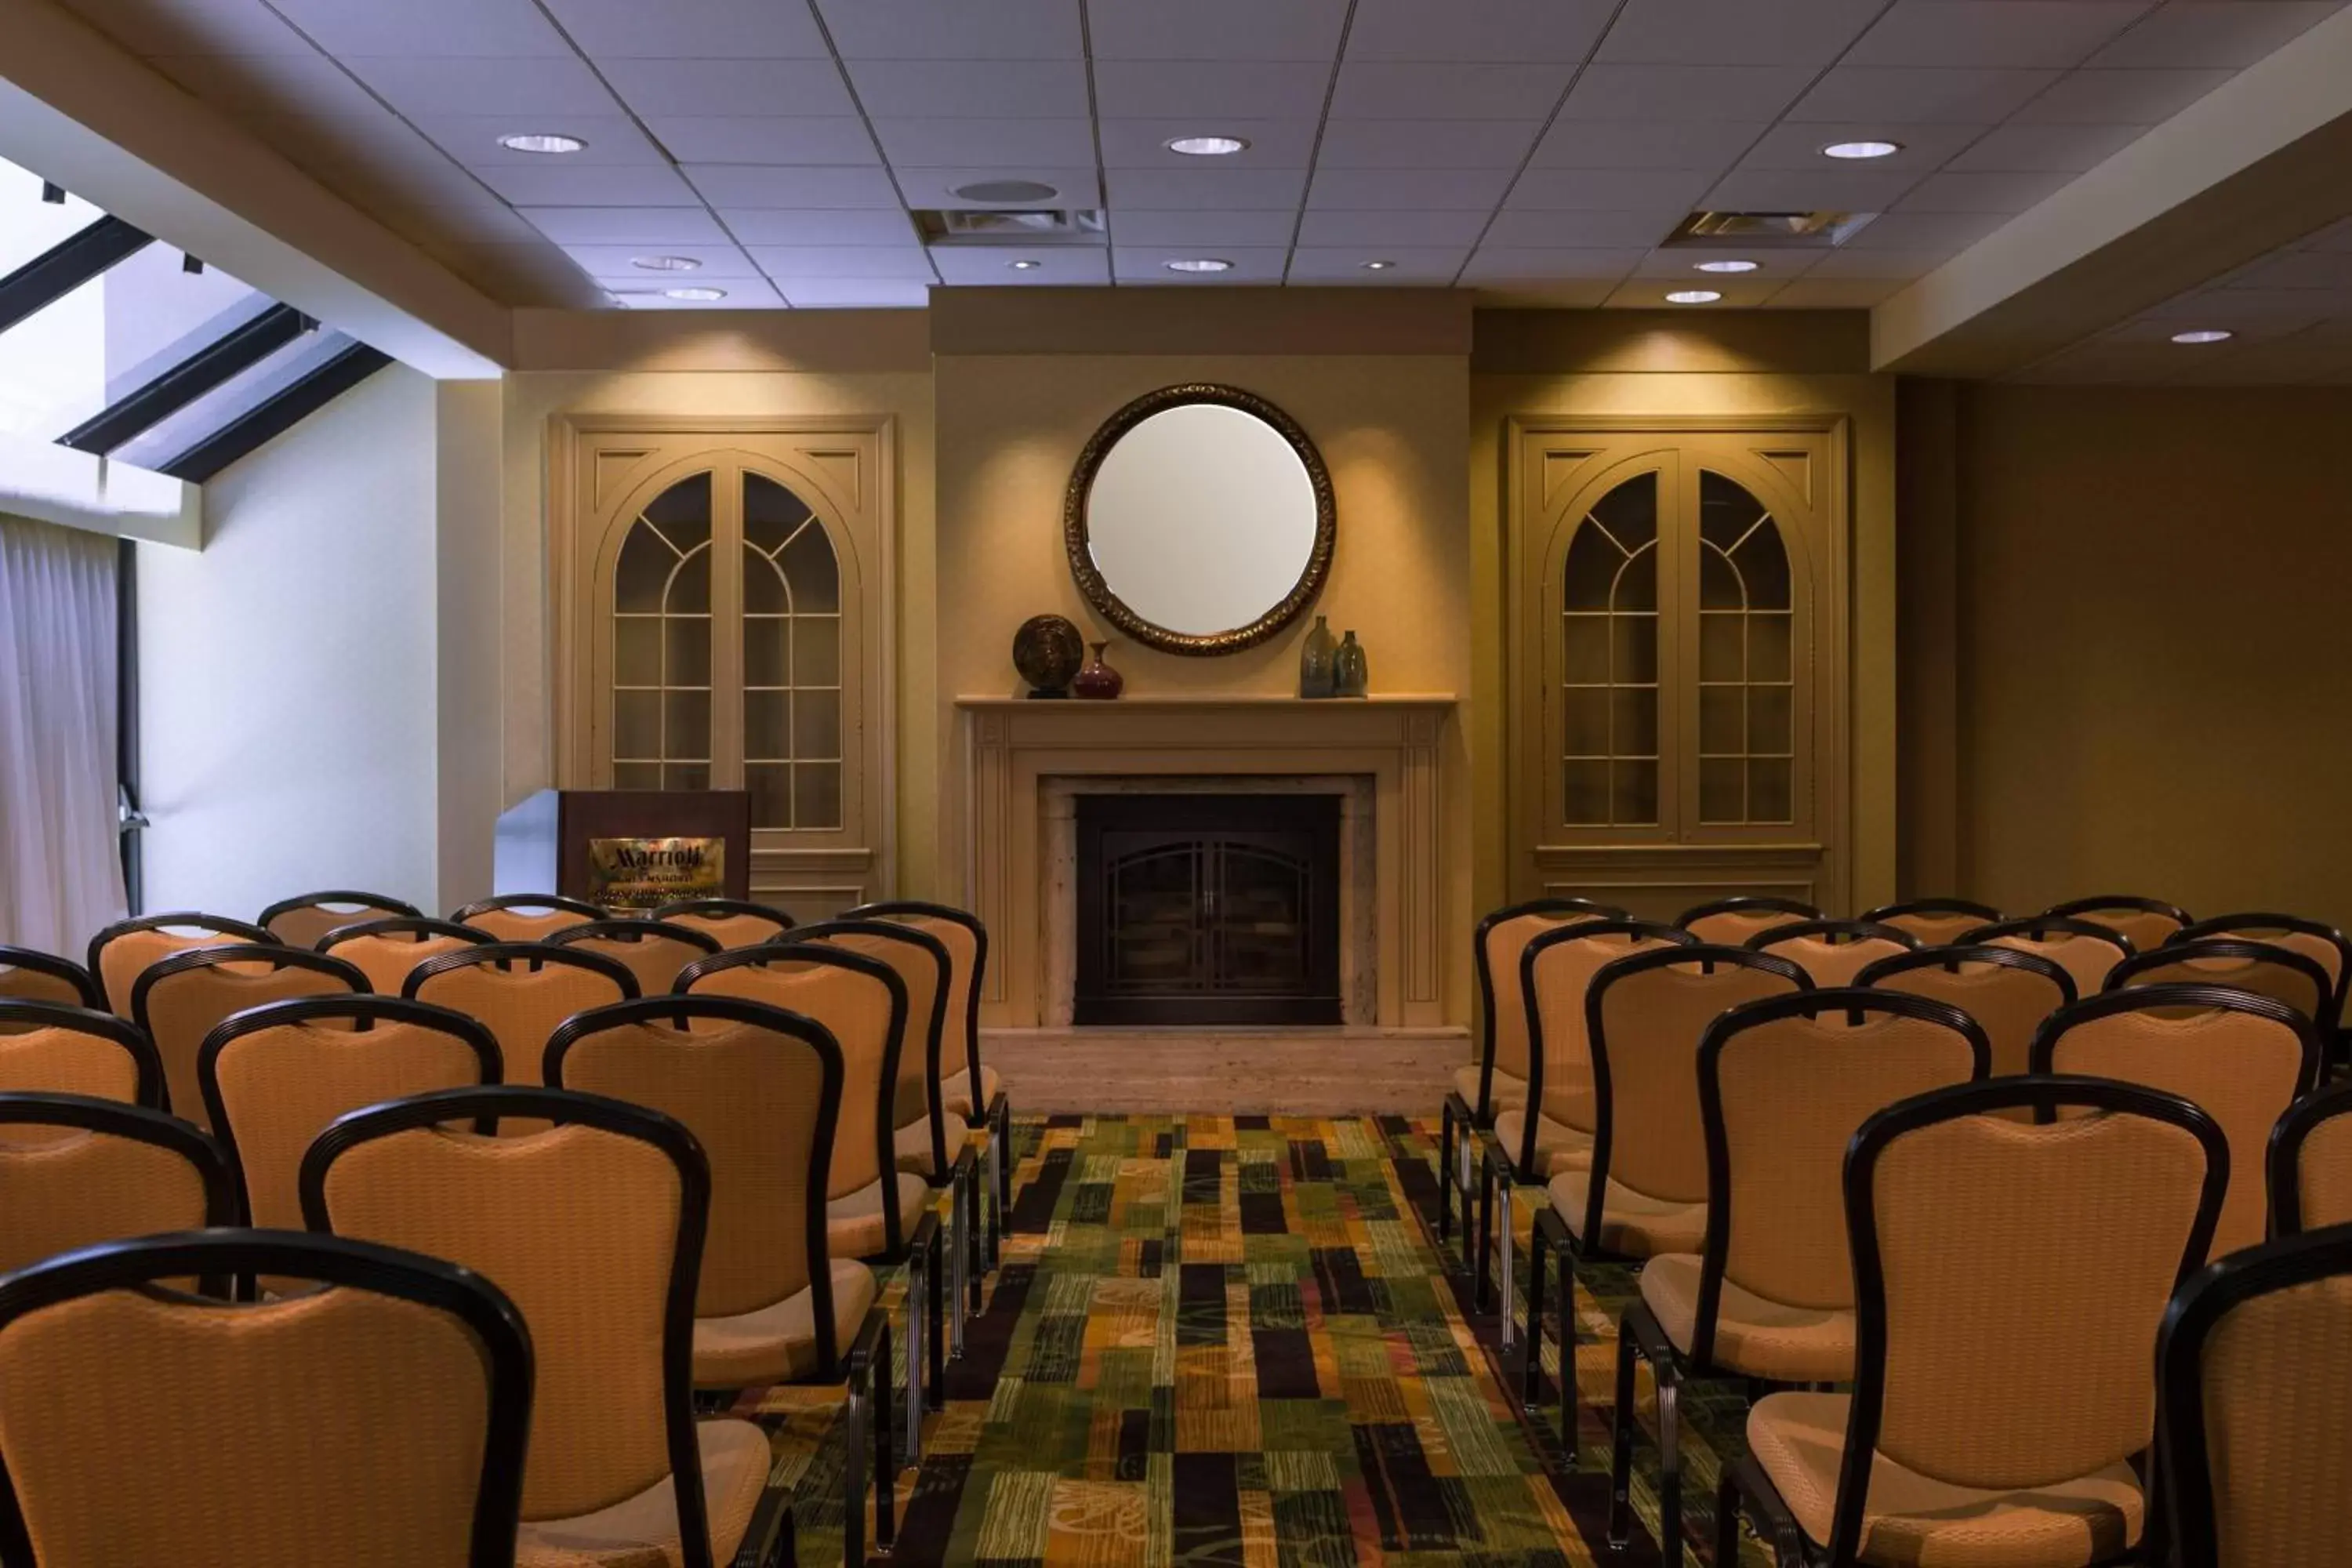 Meeting/conference room in Greensboro-High Point Marriott Airport